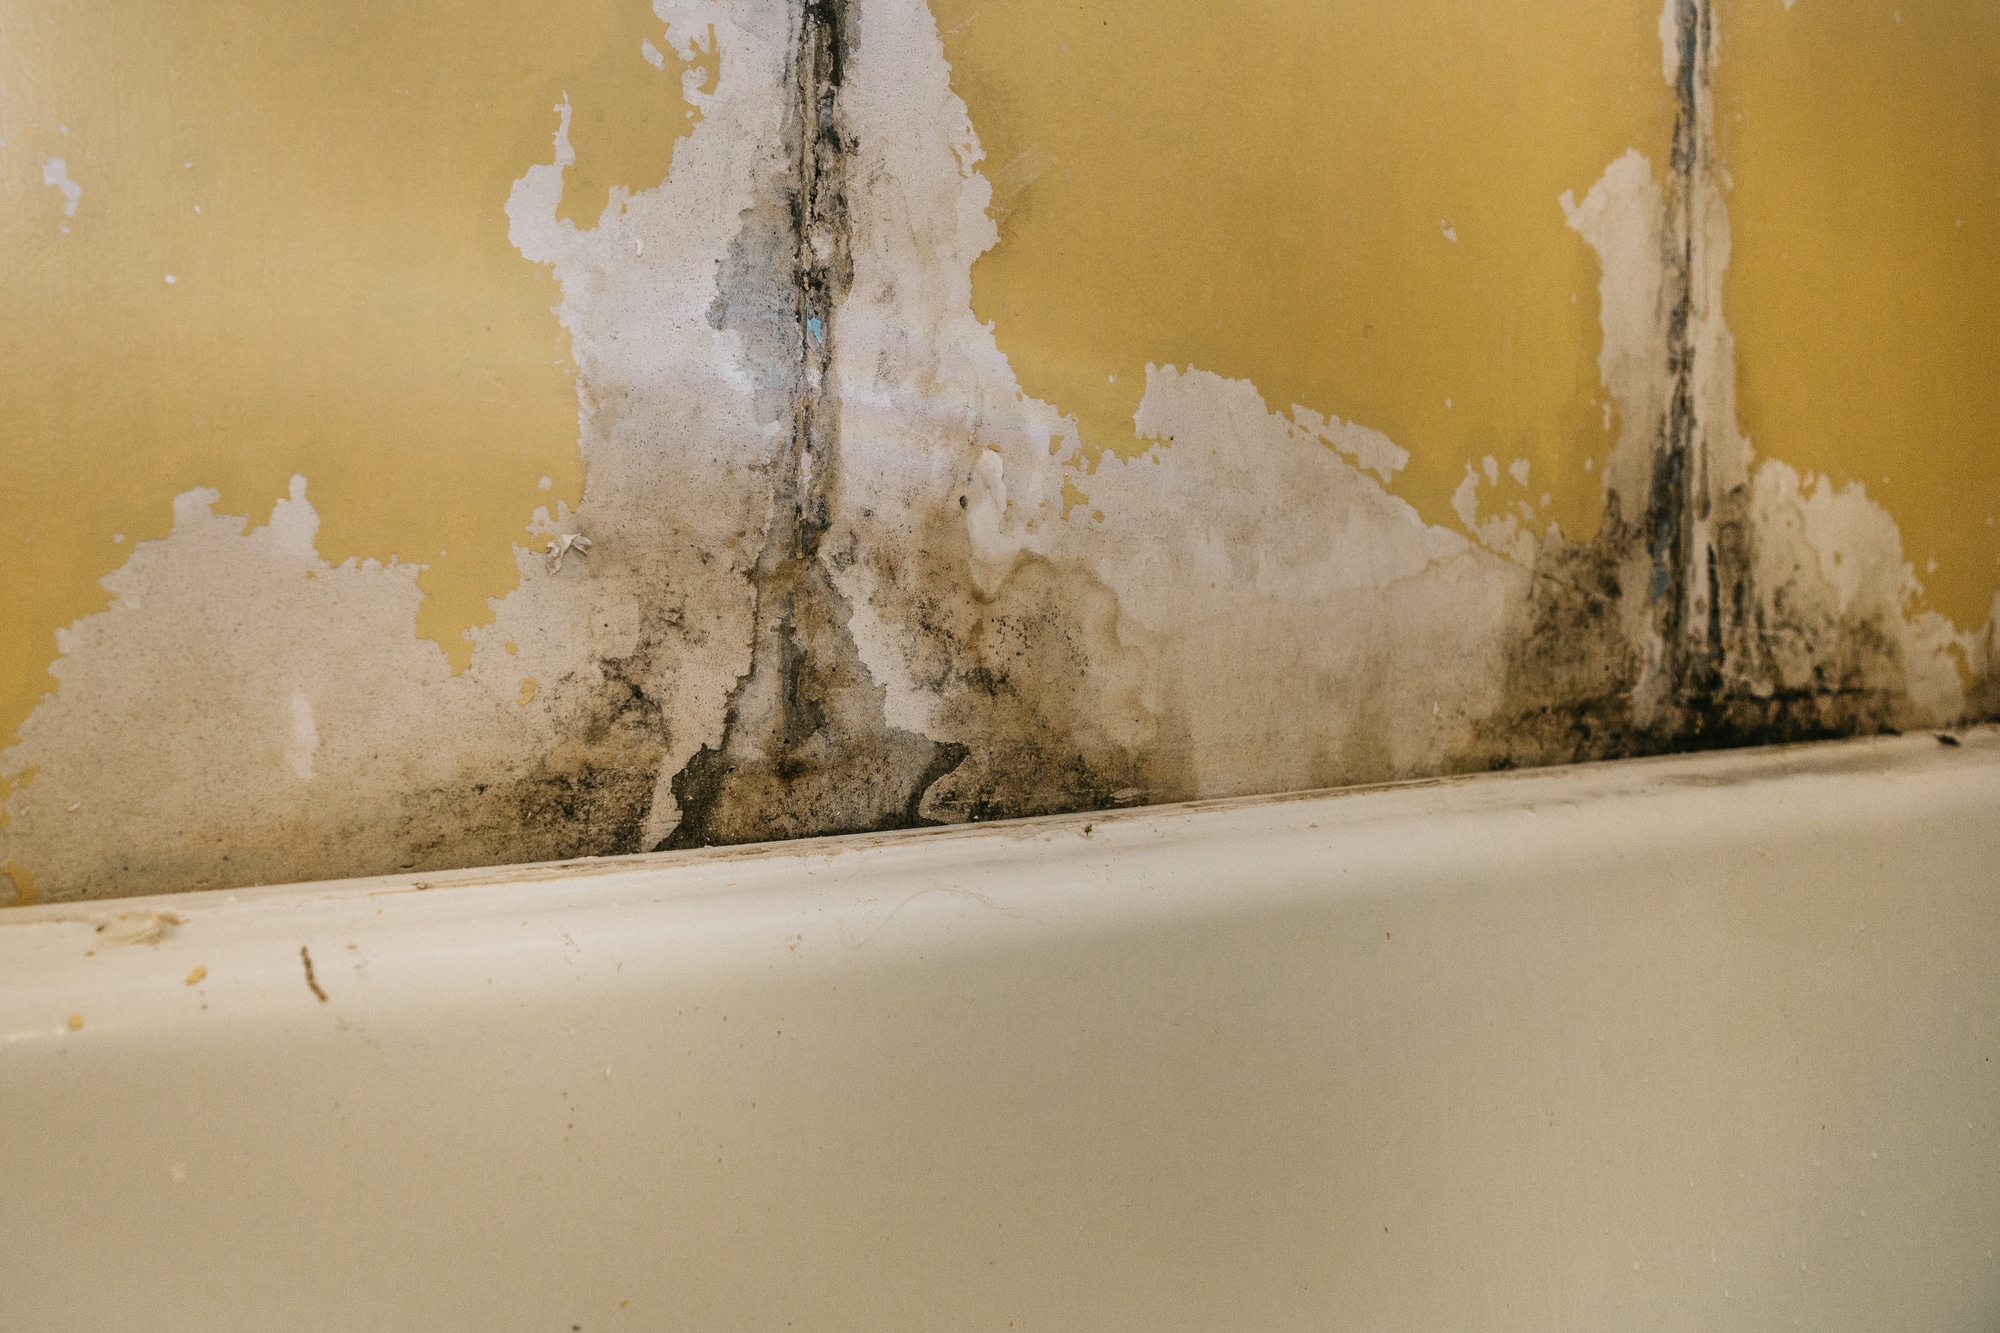 Mold growth on wall due to water damage